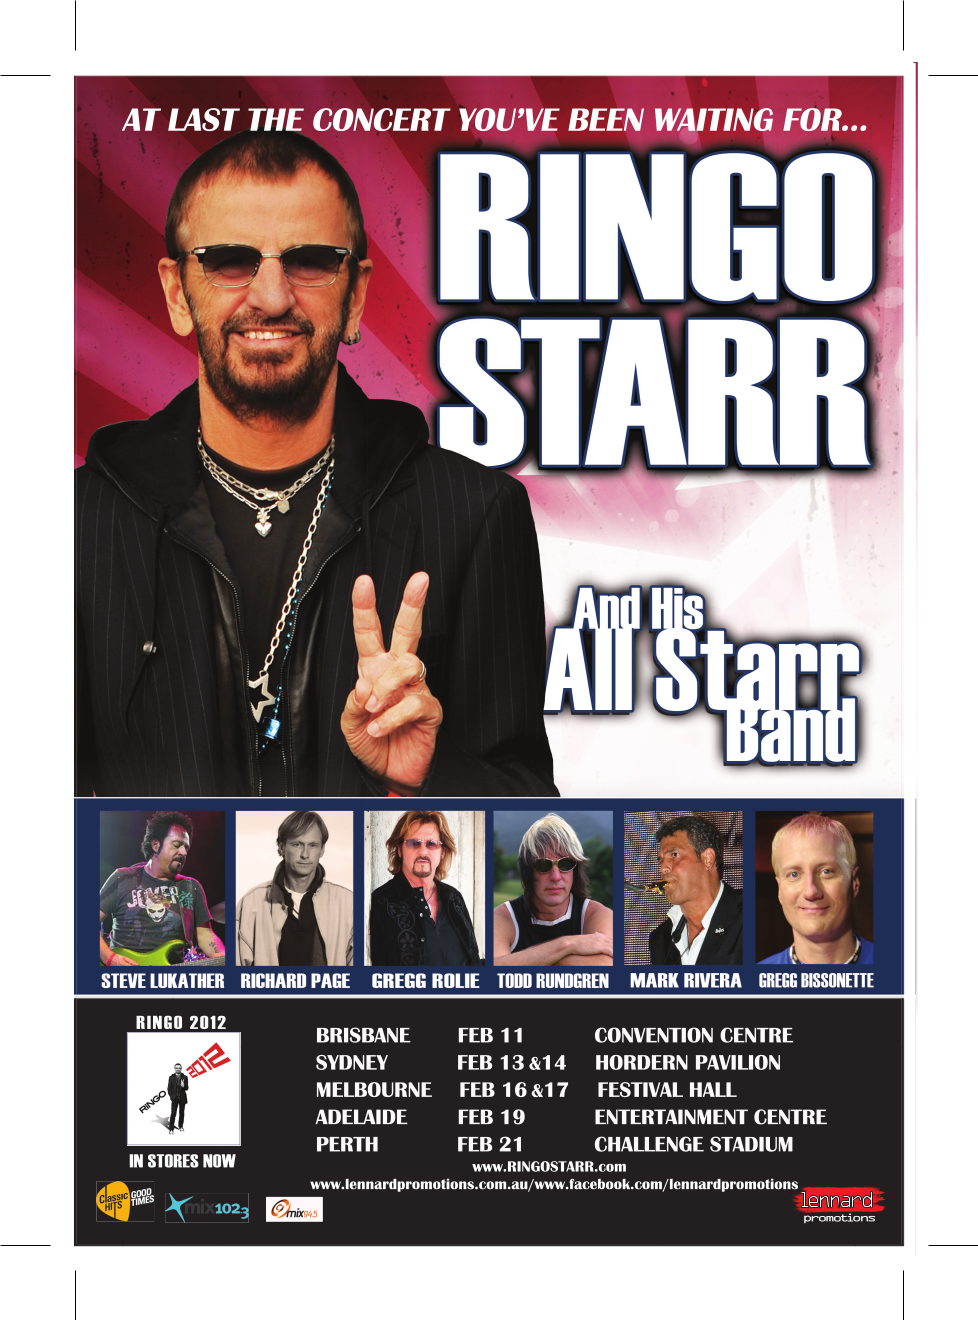 Ringo Starr and his All Starr Band Lennard Promotions